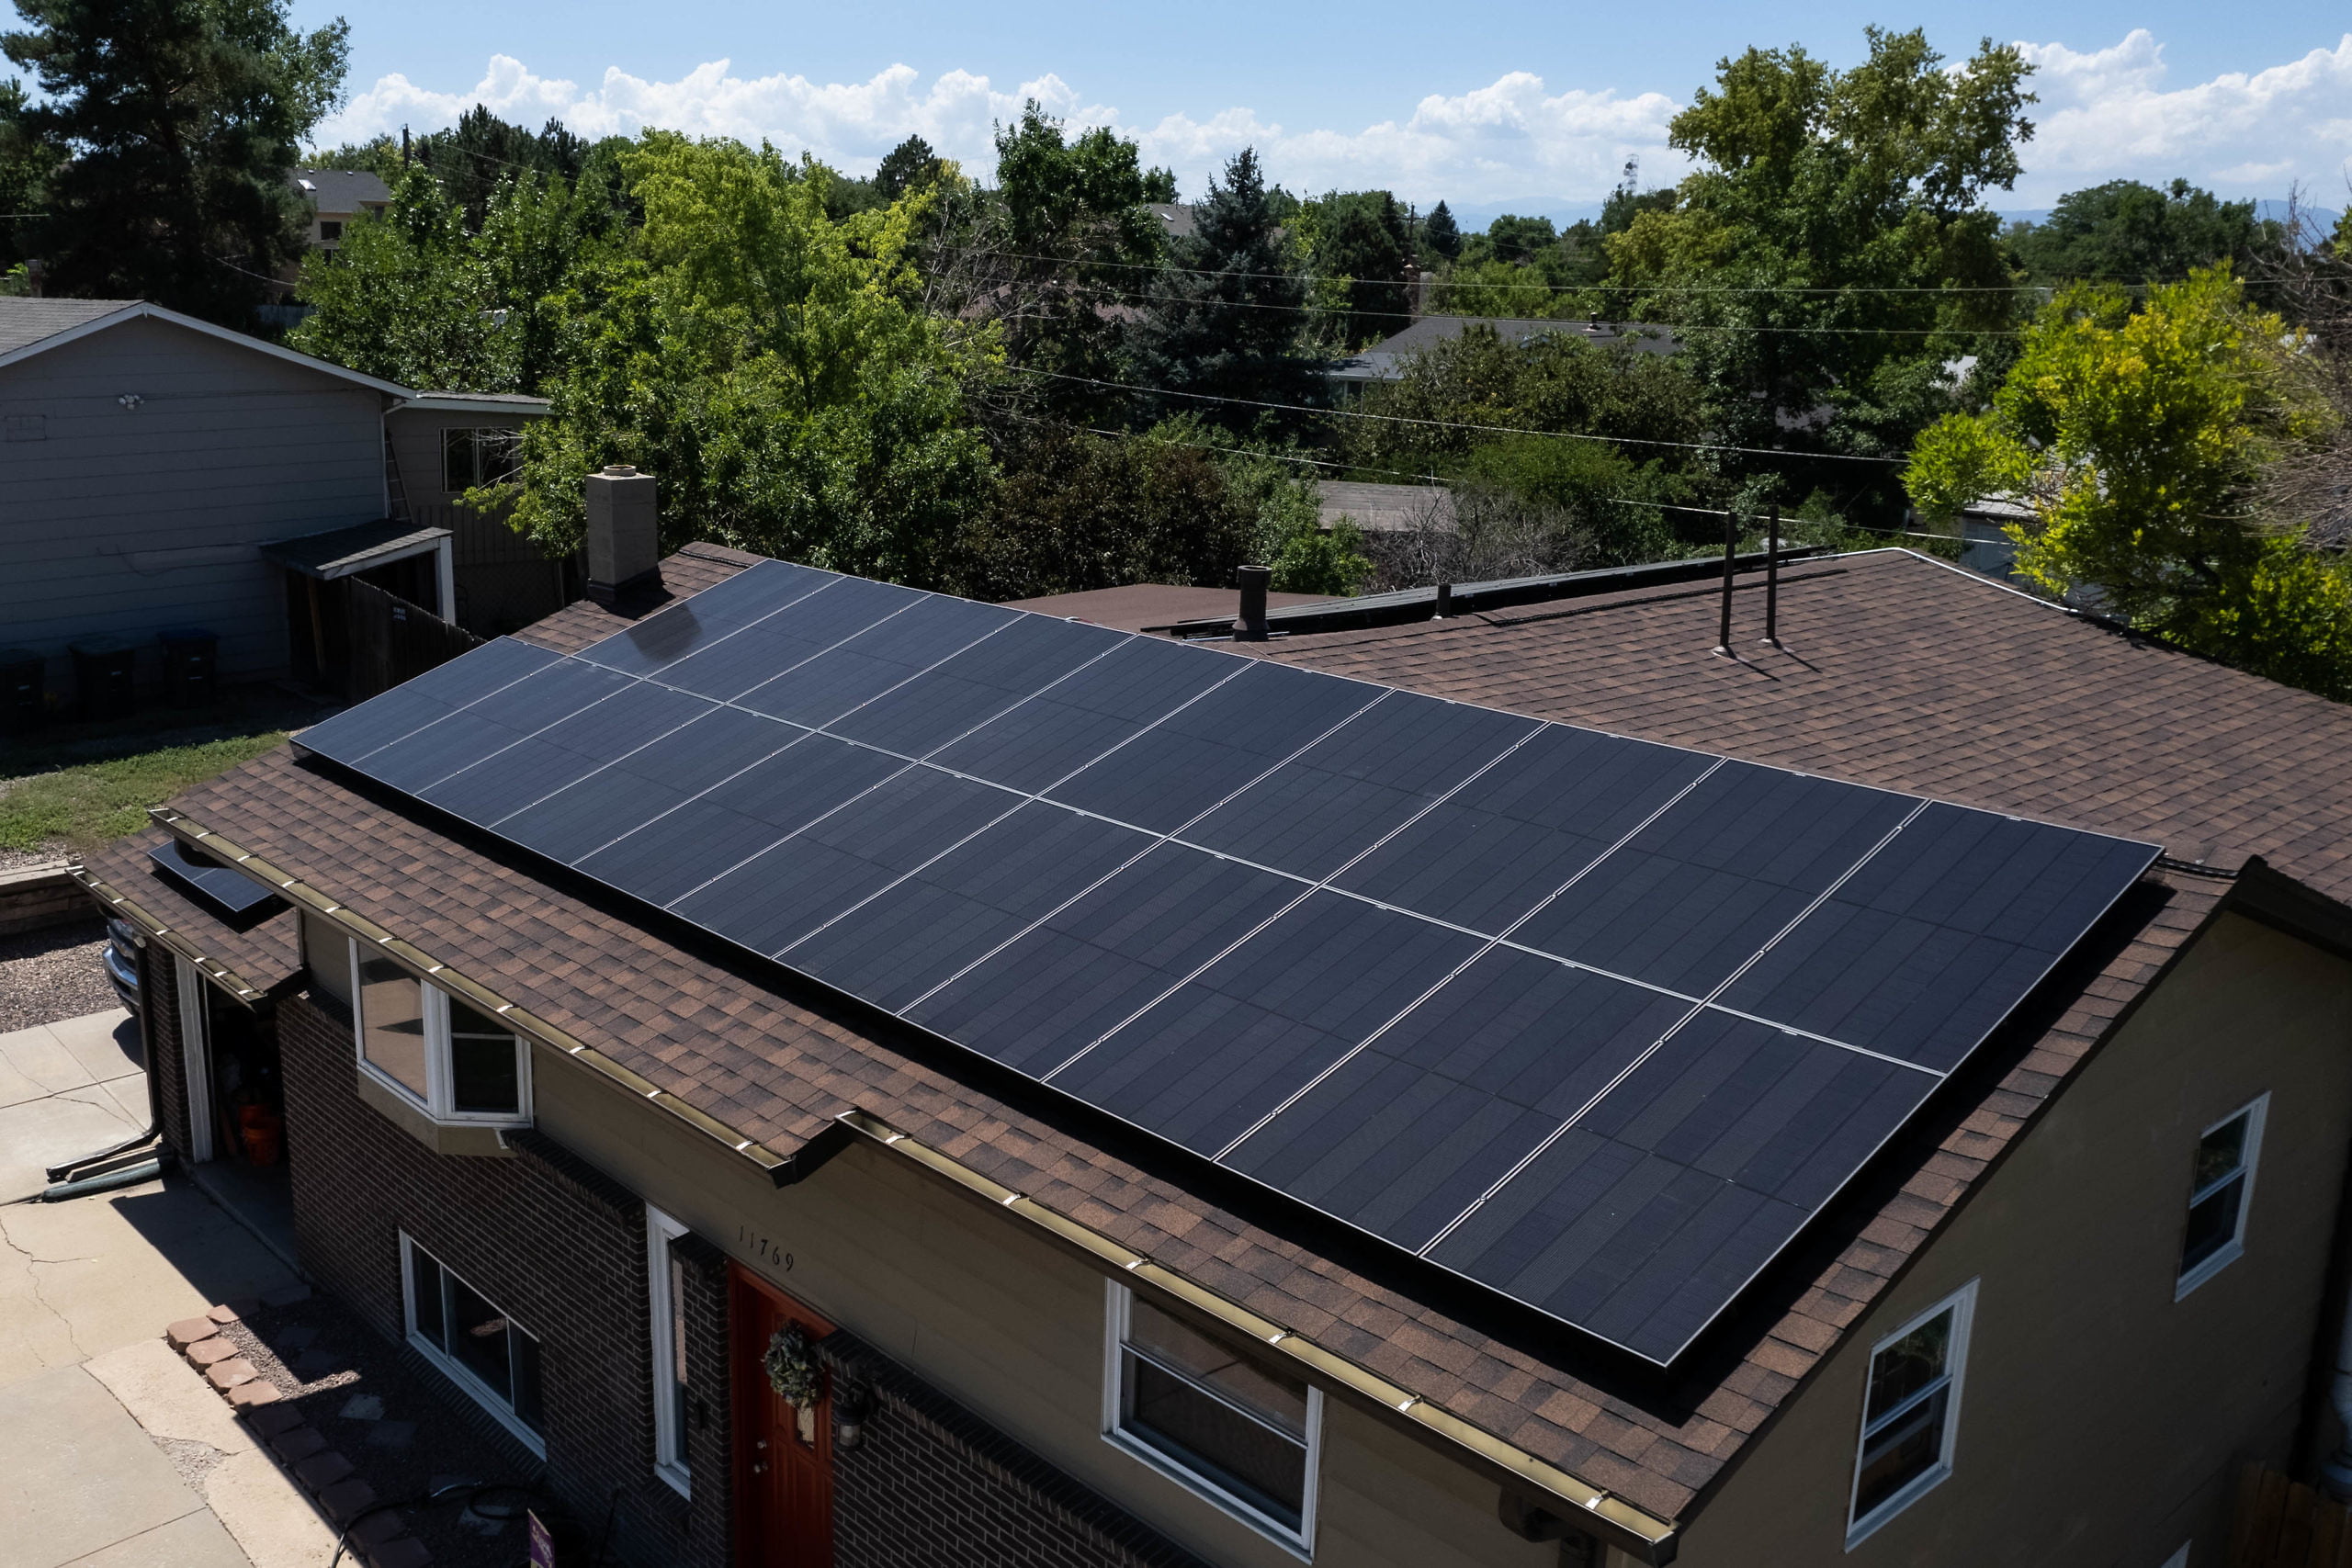 Is your roof ready for solar panels?